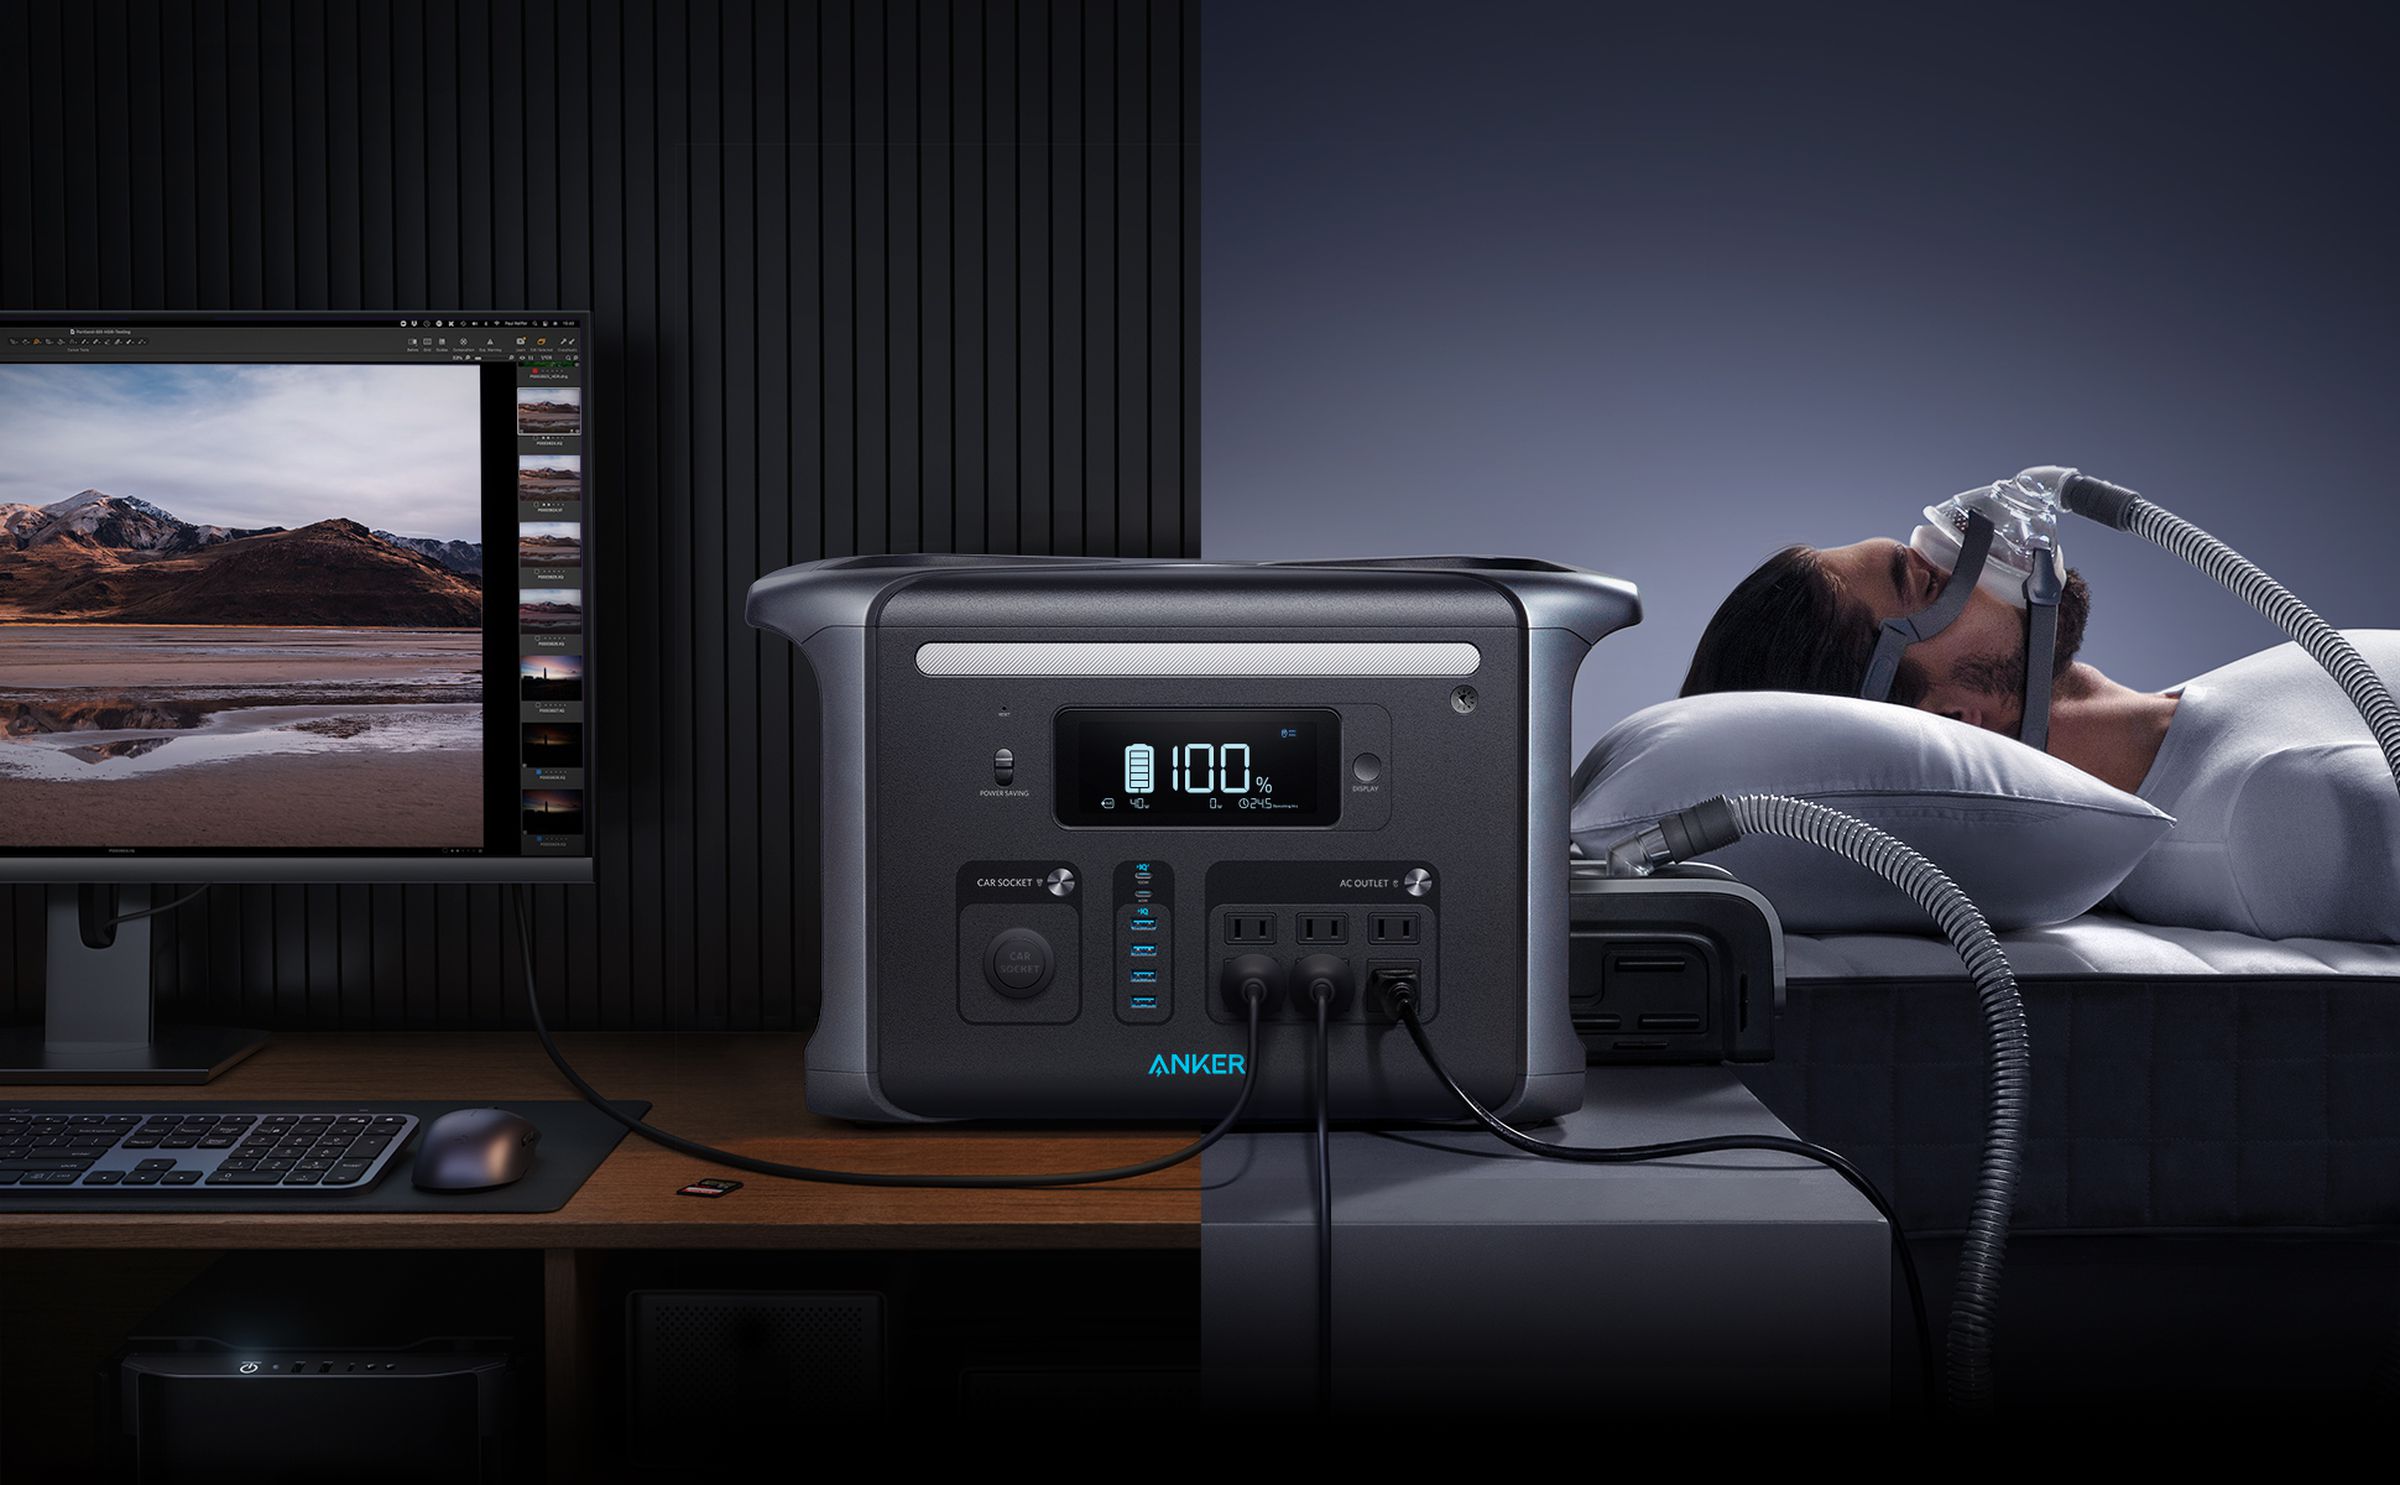 Portable power stations are often sought out by CPAP users, and this one can double as a UPS for a PC. 